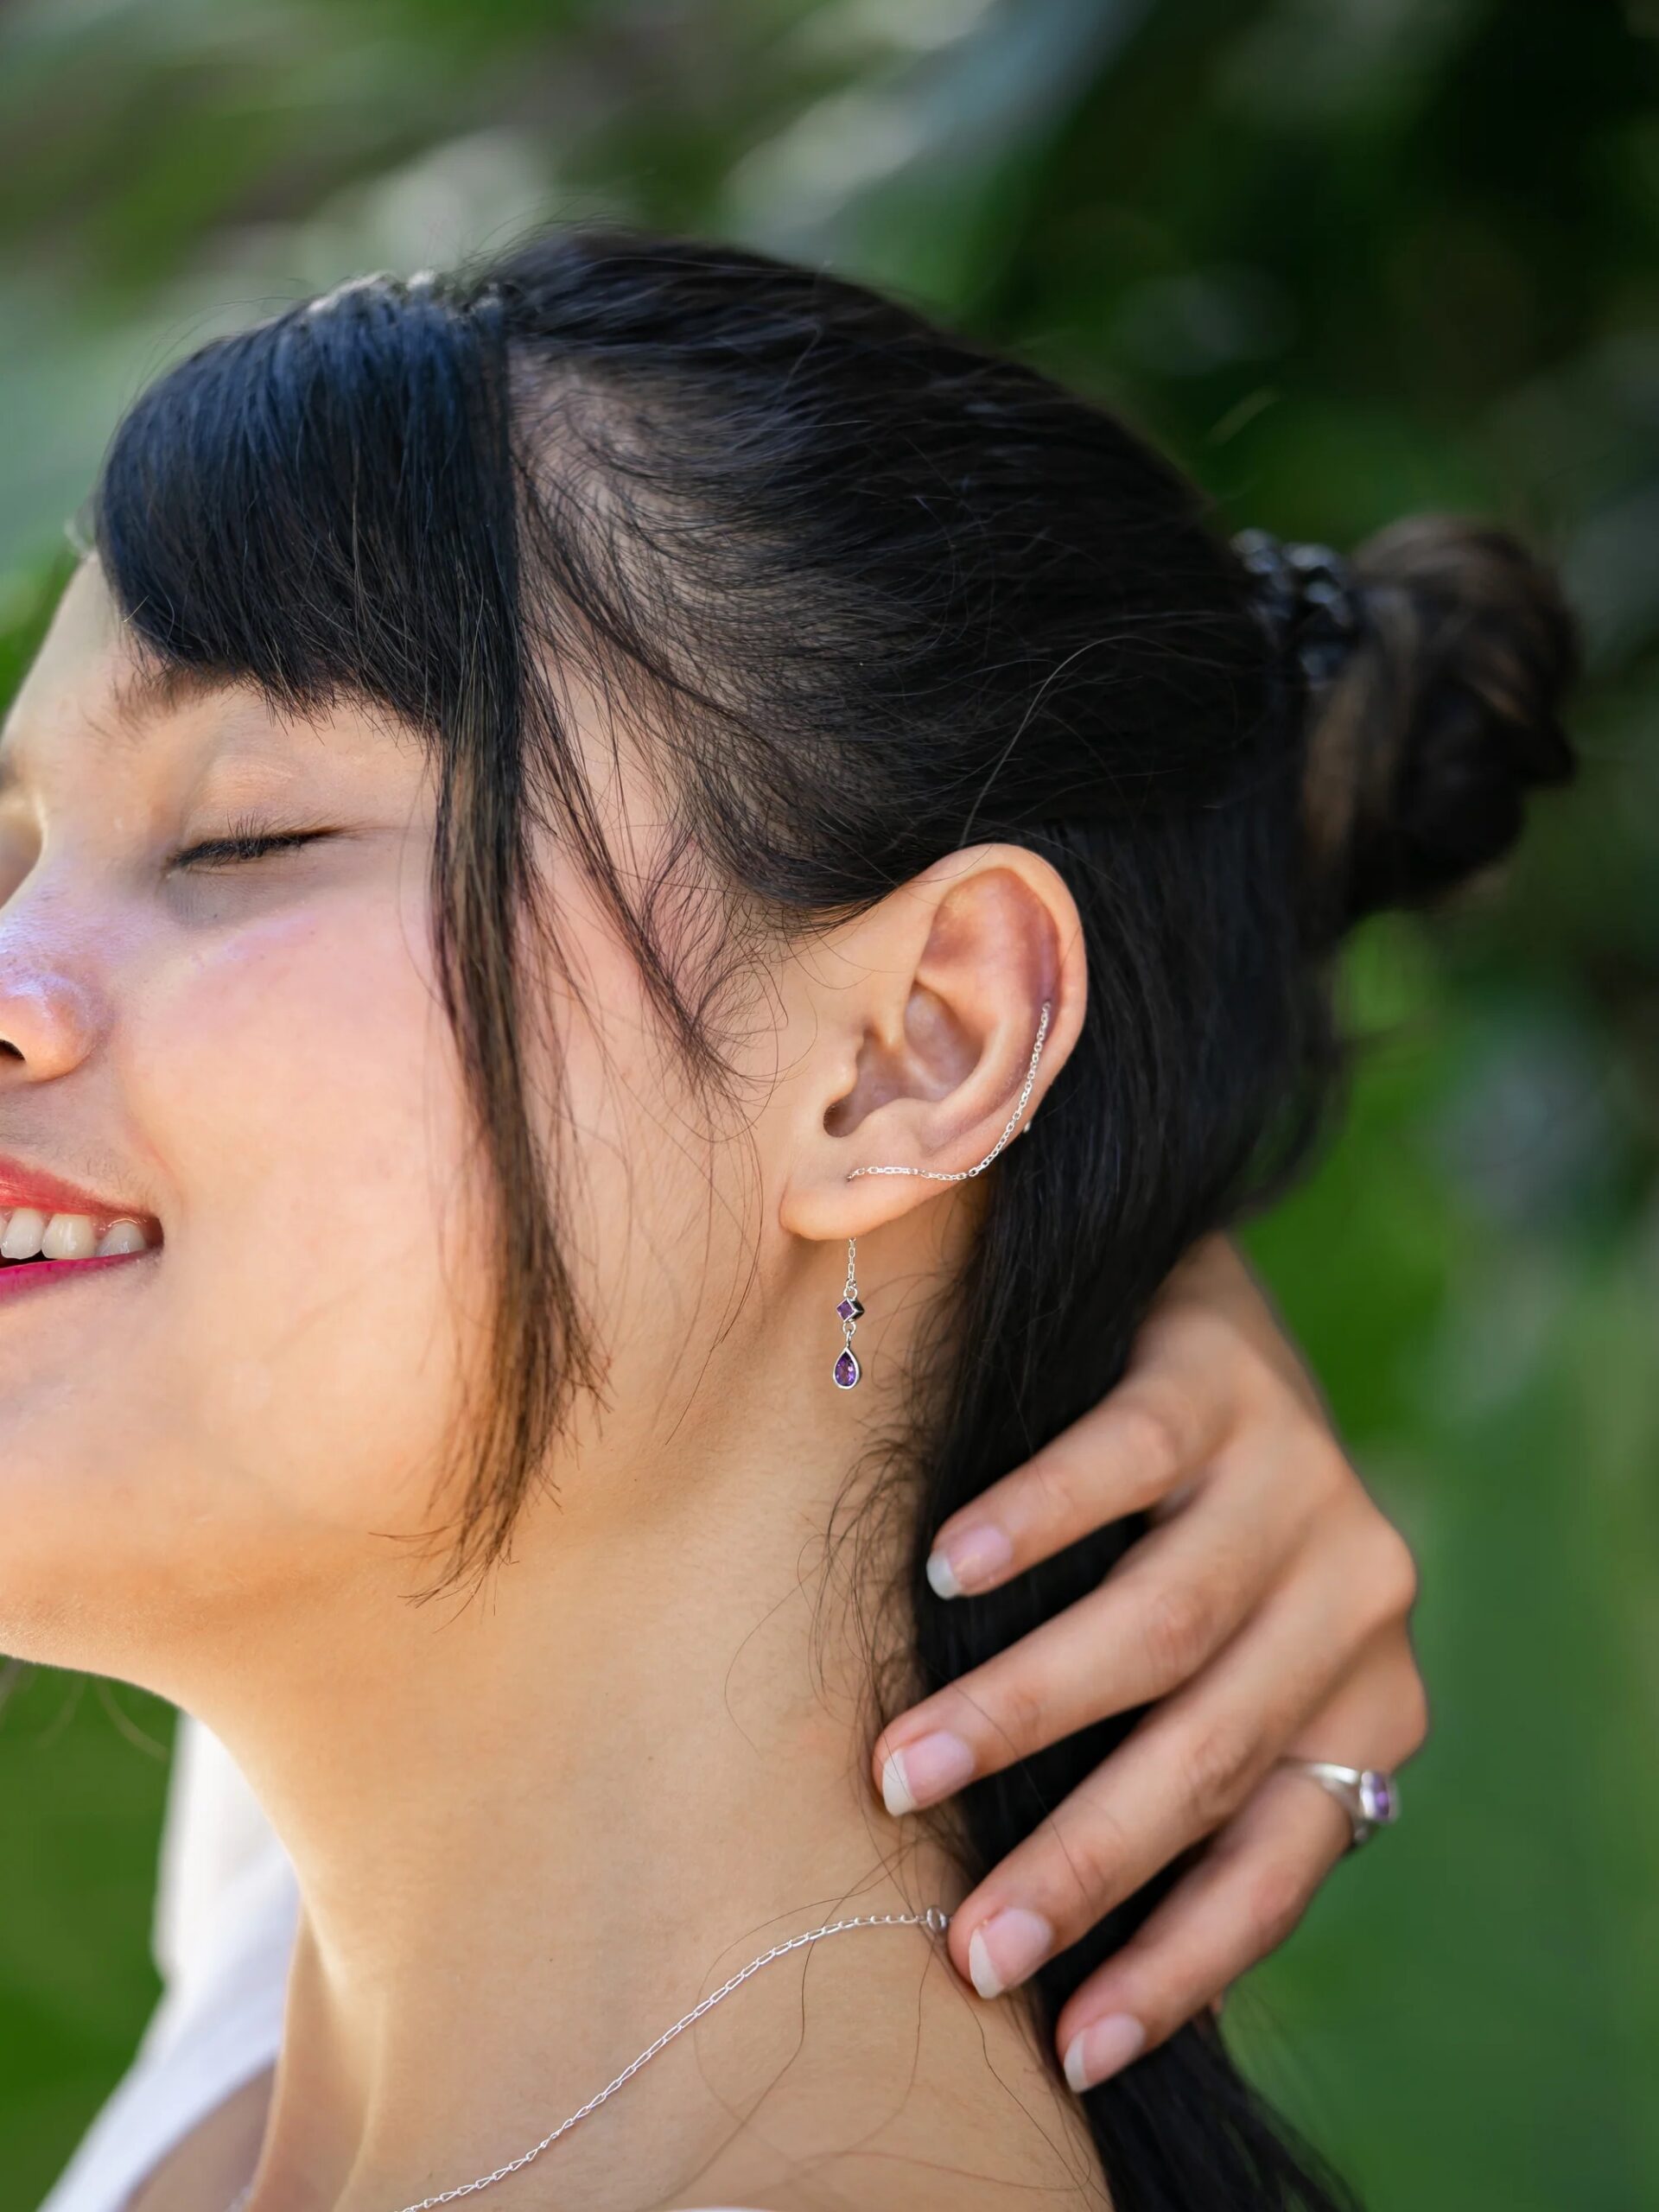 Woman smiling with closed eyes, showcasing an earring and touching her neck.